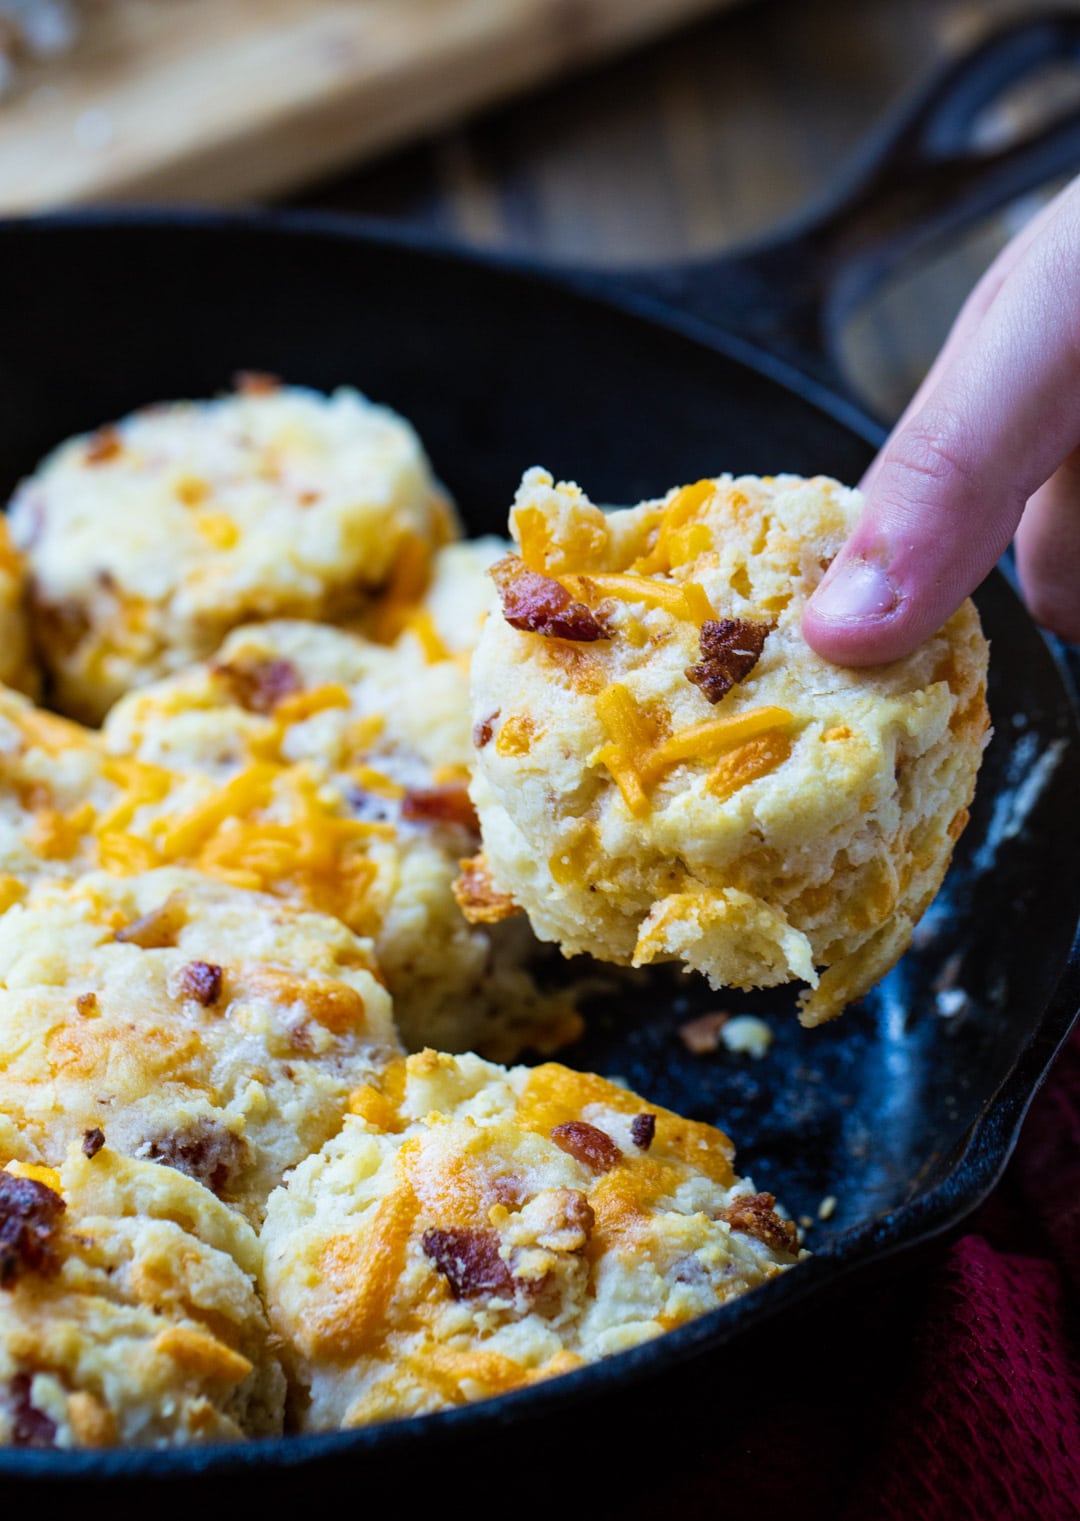 Hand picking up a Bacon Cheddar Biscuit.